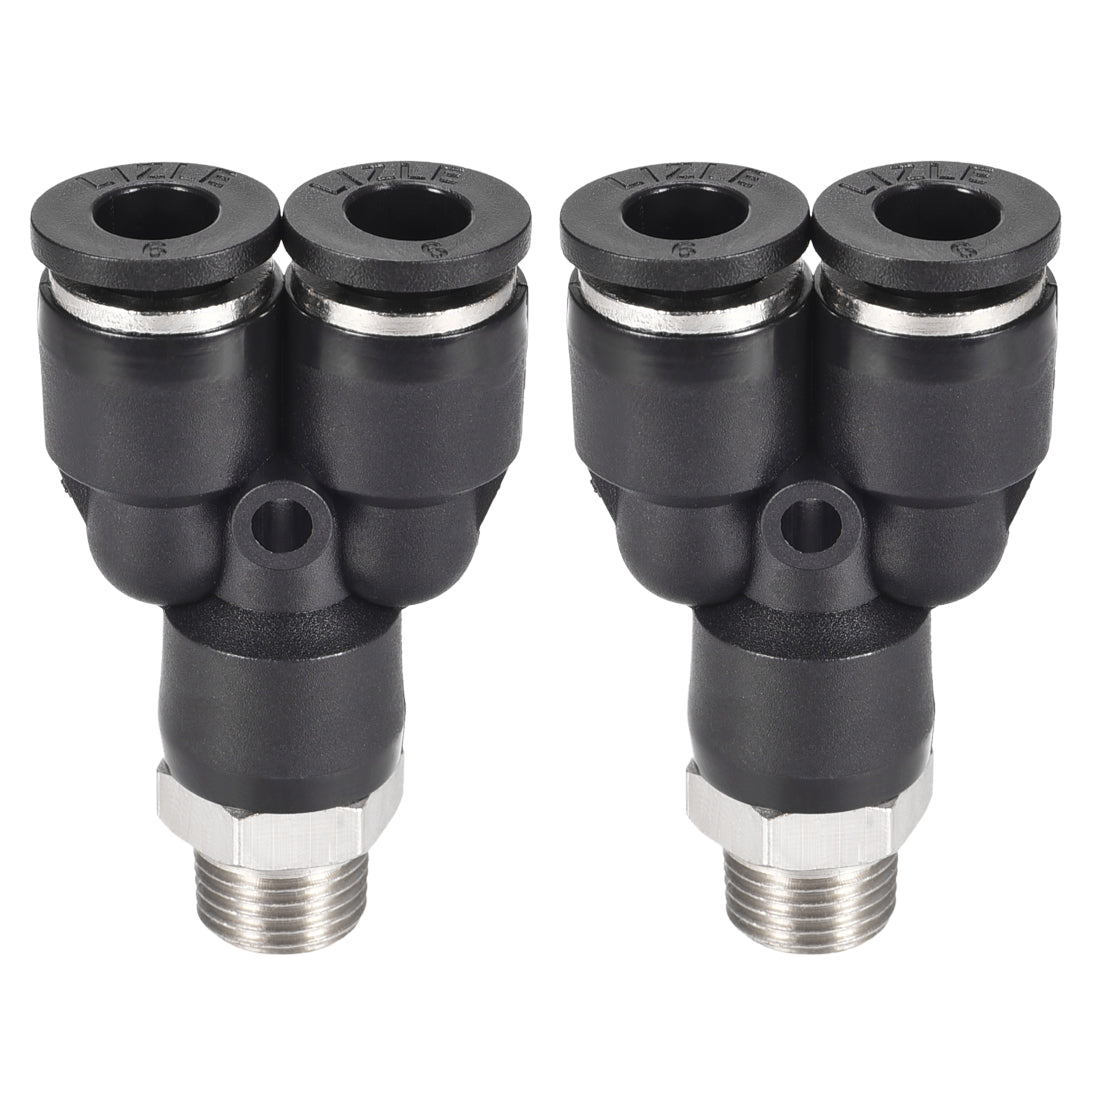 uxcell Uxcell Push To Connect Air Fittings Y Type Tube Connect 6mm OD x 1/8PT Male Thread Tube Fittings Push Lock Black 2Pcs